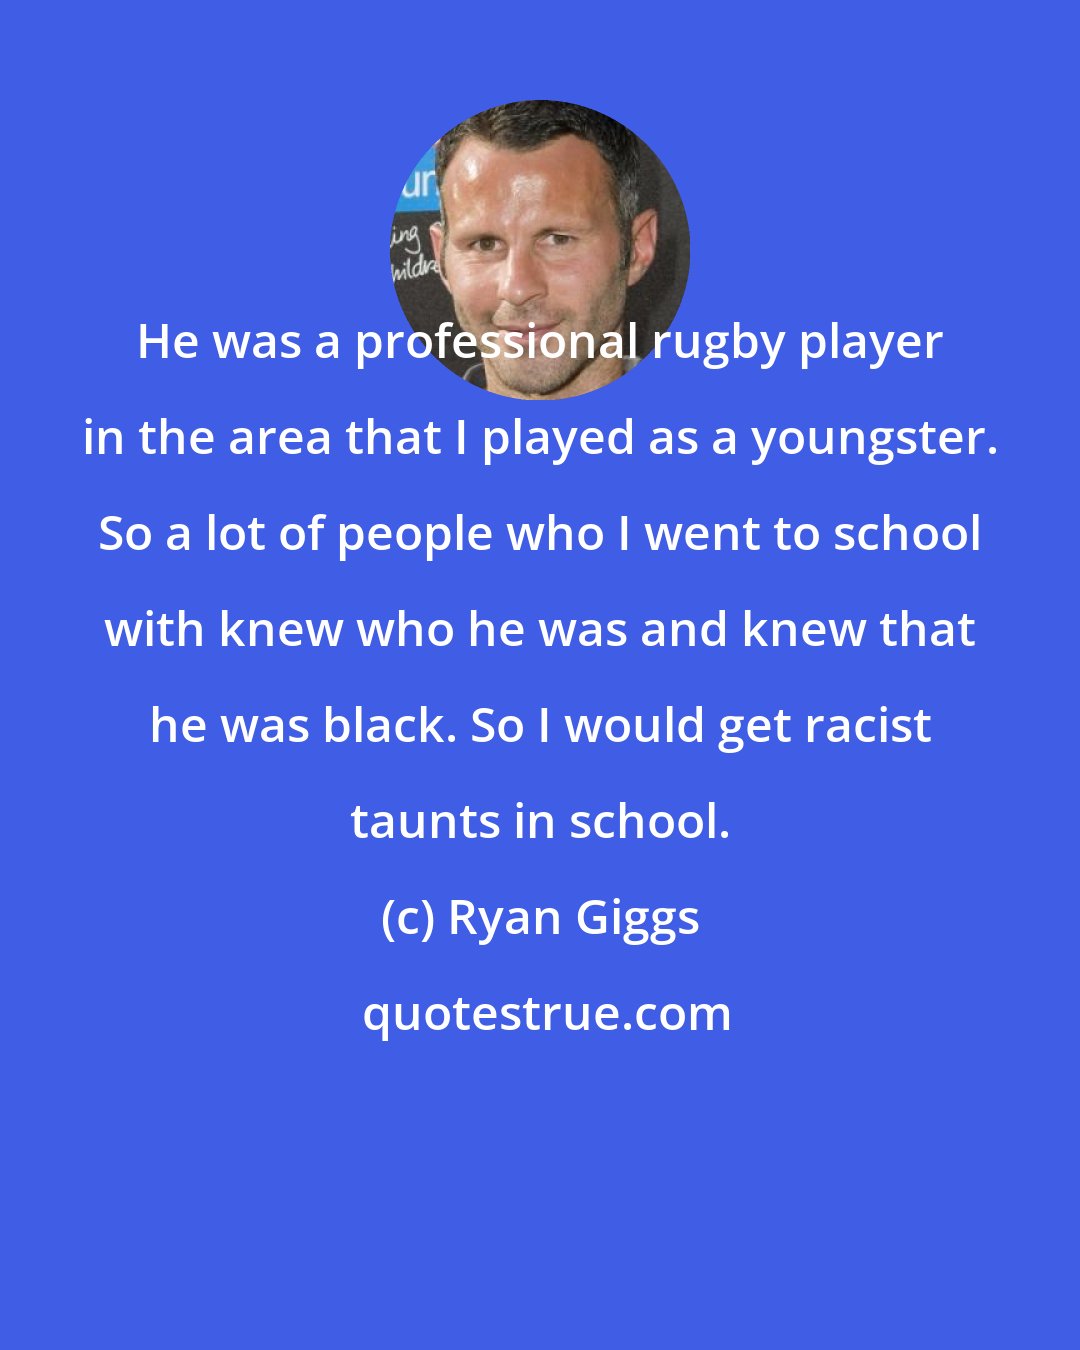 Ryan Giggs: He was a professional rugby player in the area that I played as a youngster. So a lot of people who I went to school with knew who he was and knew that he was black. So I would get racist taunts in school.